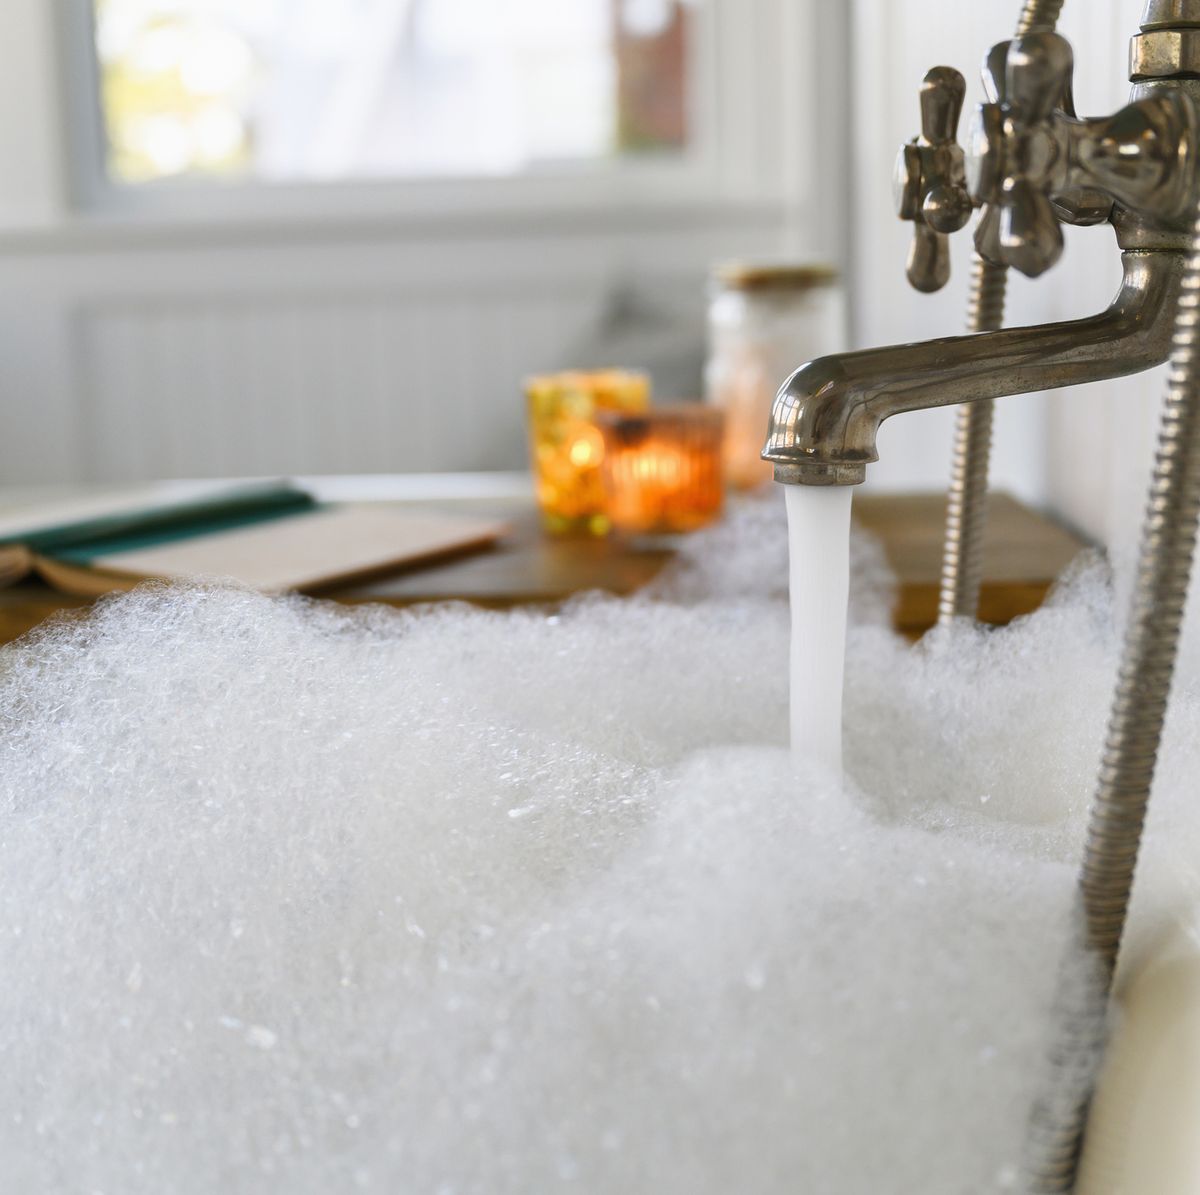 Why a daily bath helps beat depression – and how to have a good